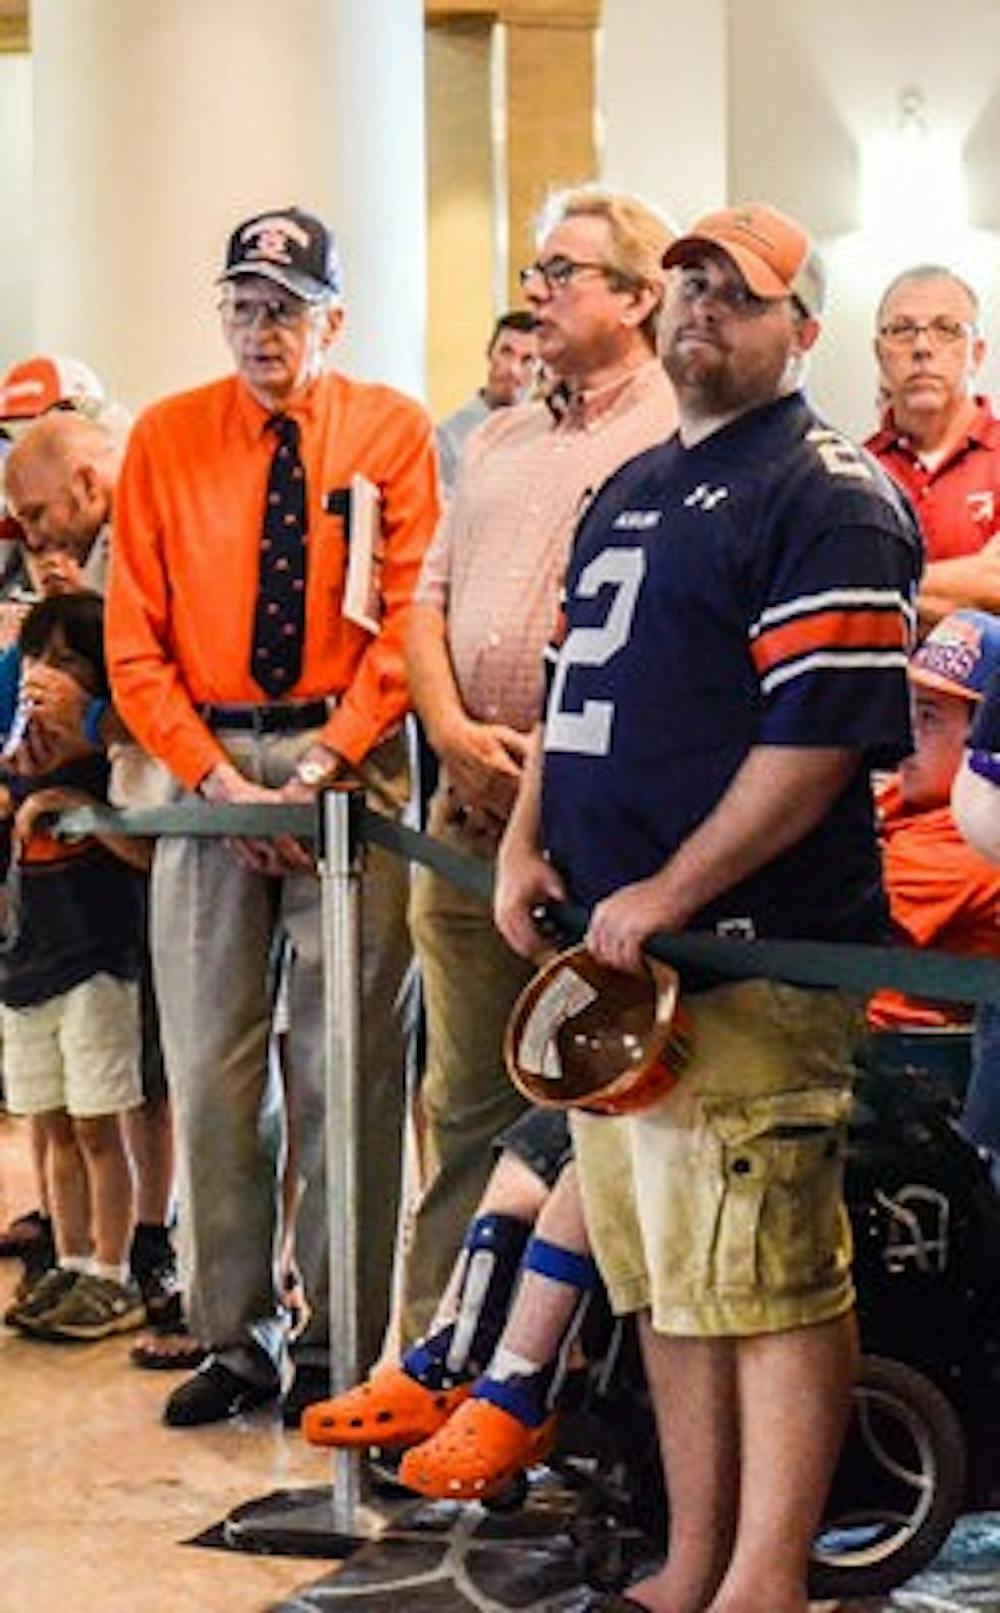 Left to right: Dickie Pearson, Jim McDaed and Adam Kelley wait with other Auburn fans in the lobby of the Wynfrey Hotel at SEC Media Days.
(Raye May | Photo & Design Editor)